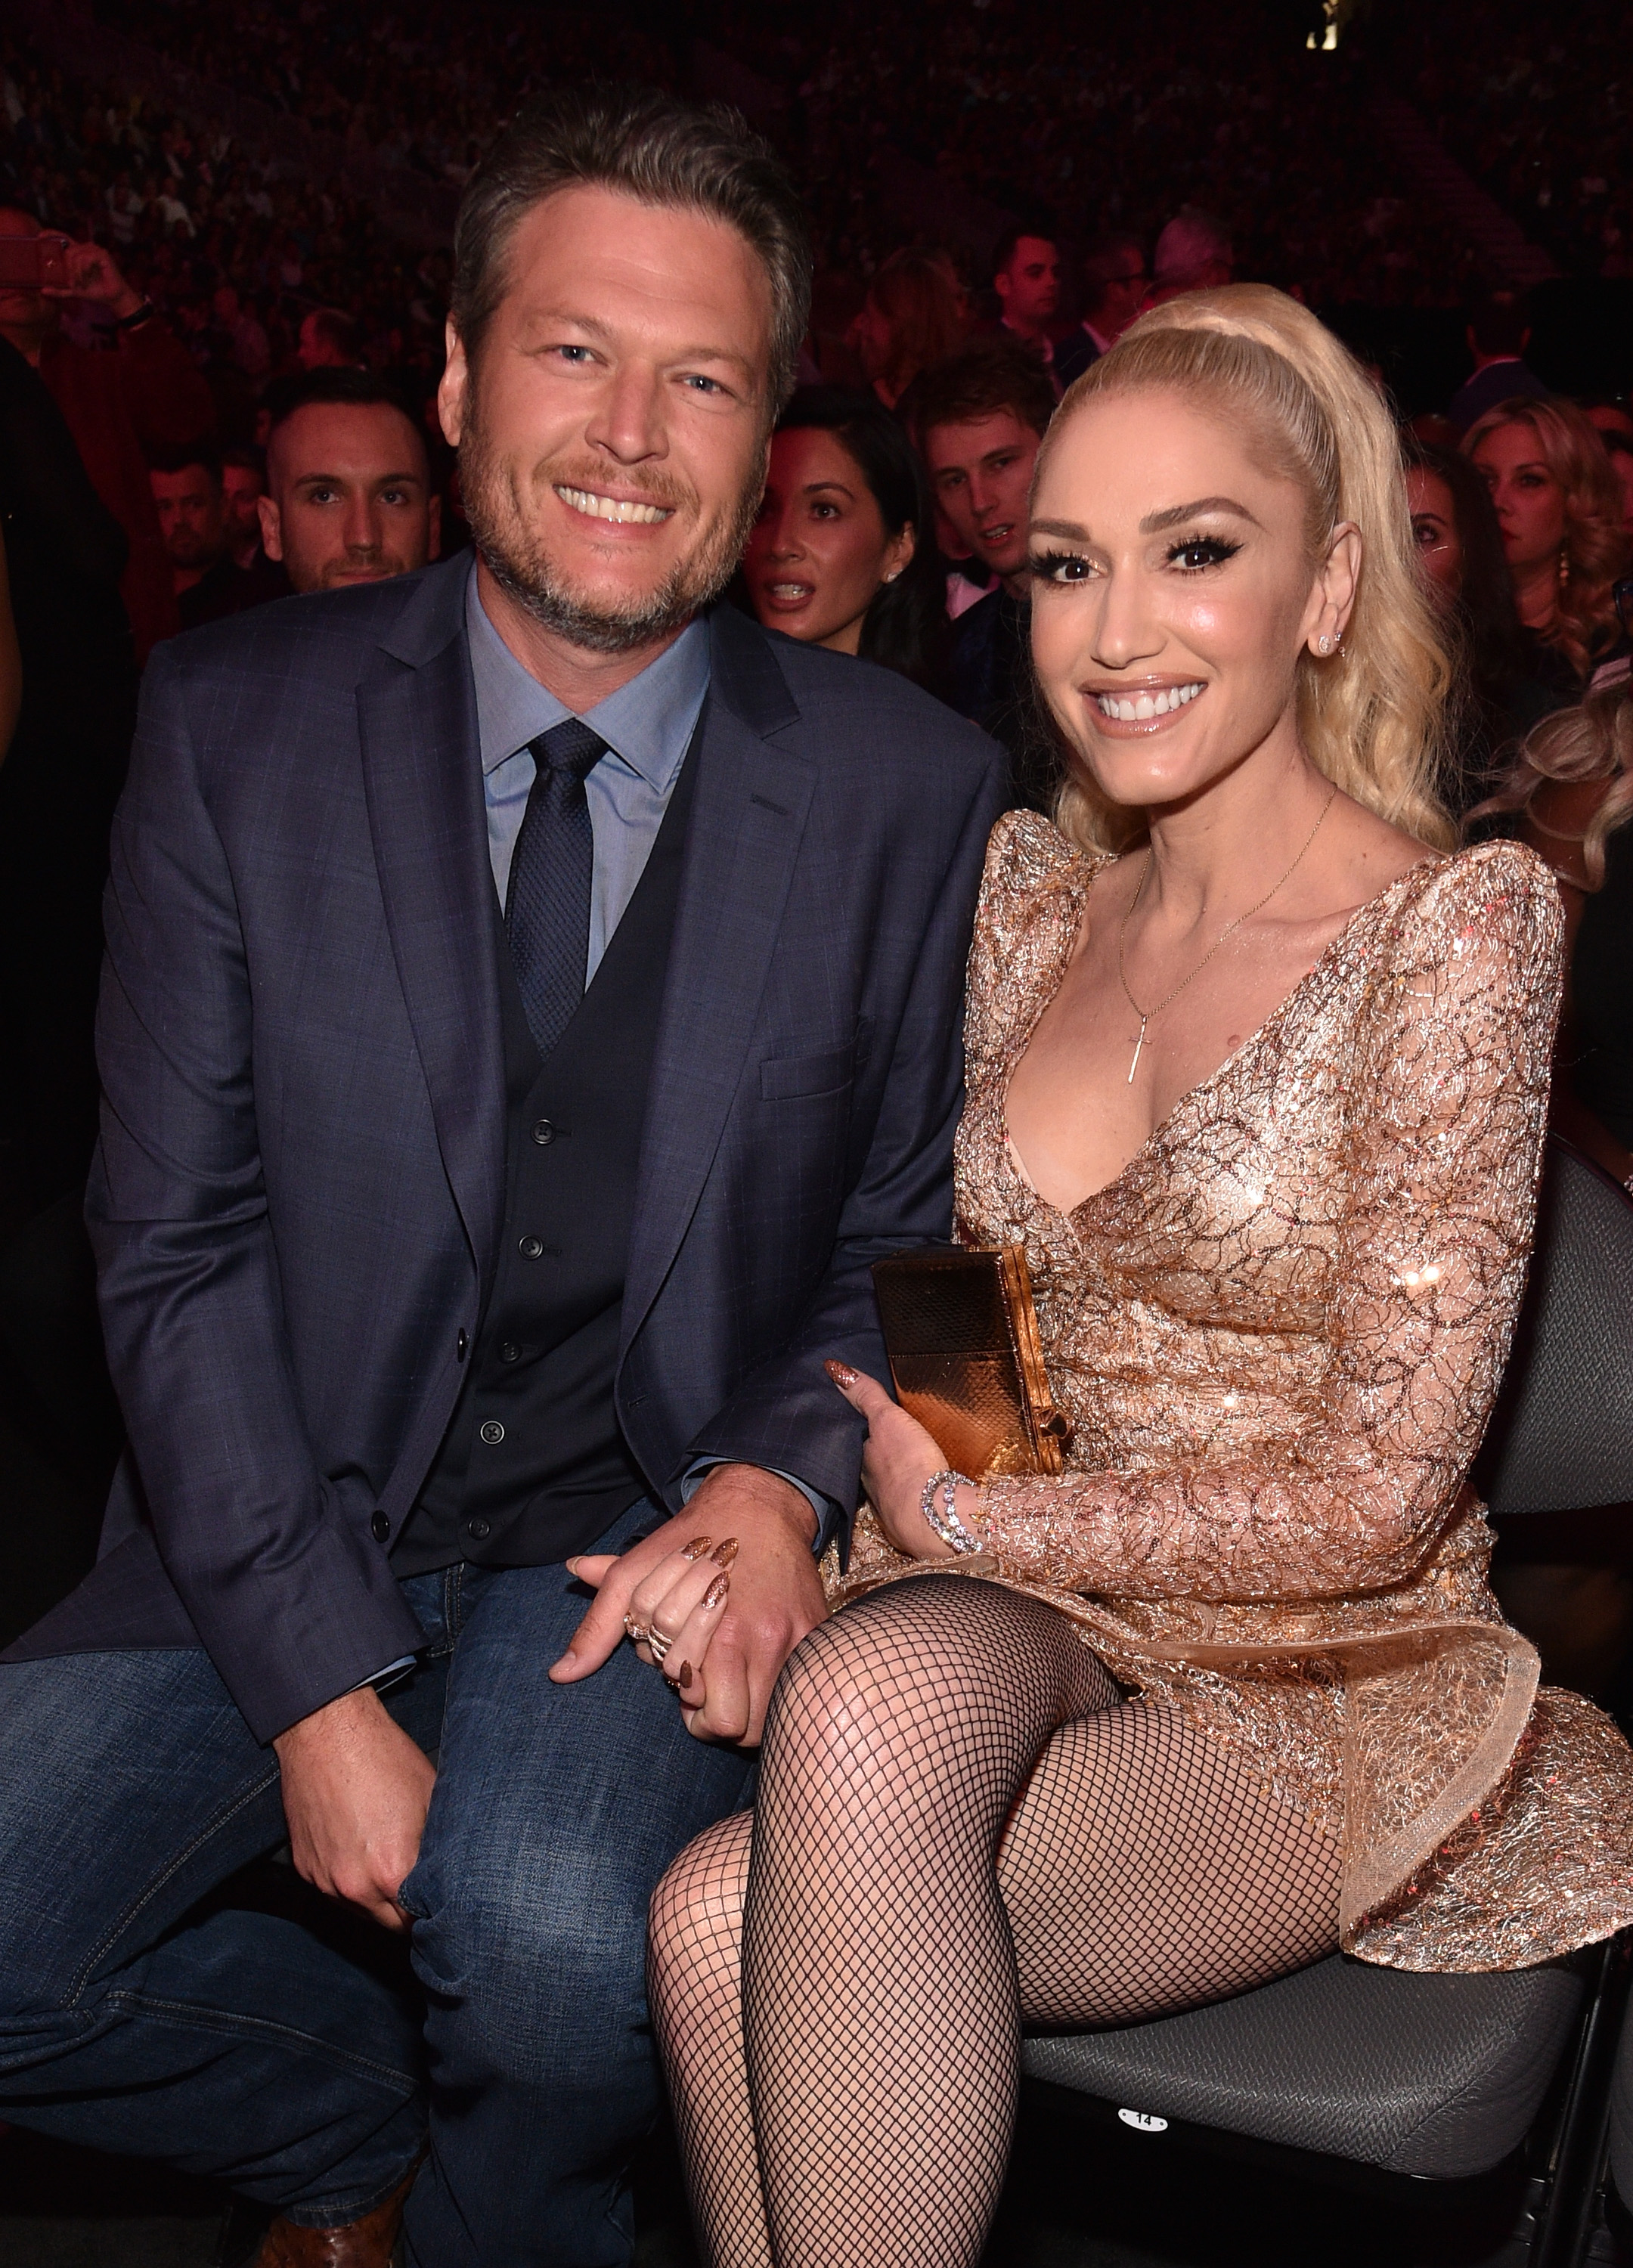 Blake Shelton and Gwen Stefani attend the Billboard Music Awards at T-Mobile Arena in Las Vegas, Nevada, on May 21, 2017. | Source: Getty Images